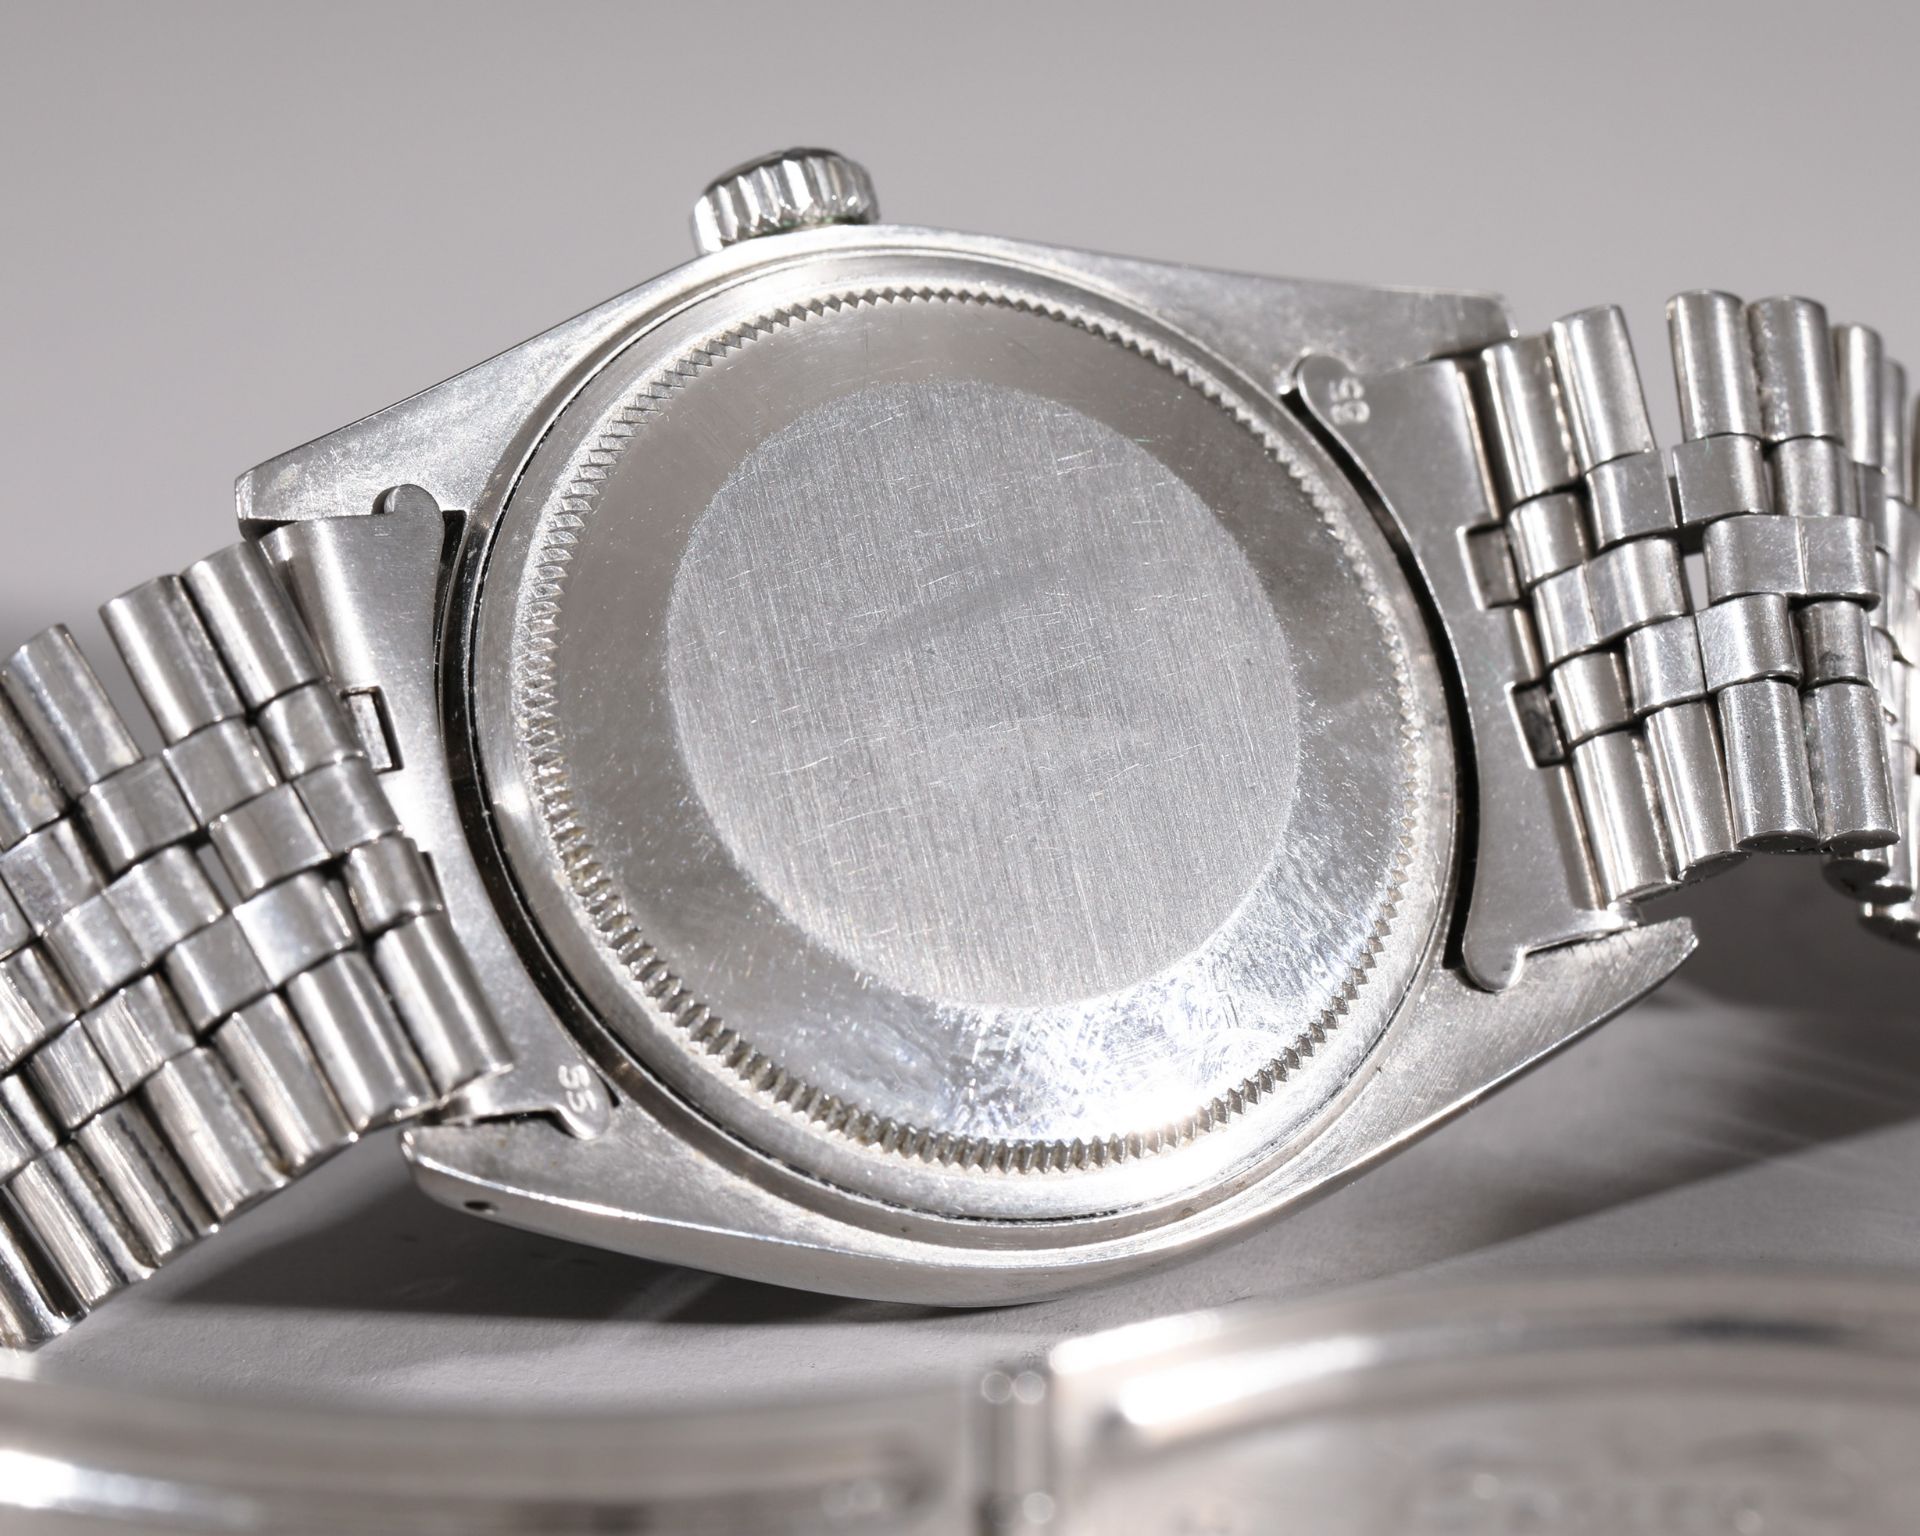 Rolex Oyster Perpetual Datejust. Ref.1601 automatic men's watch - Image 6 of 8